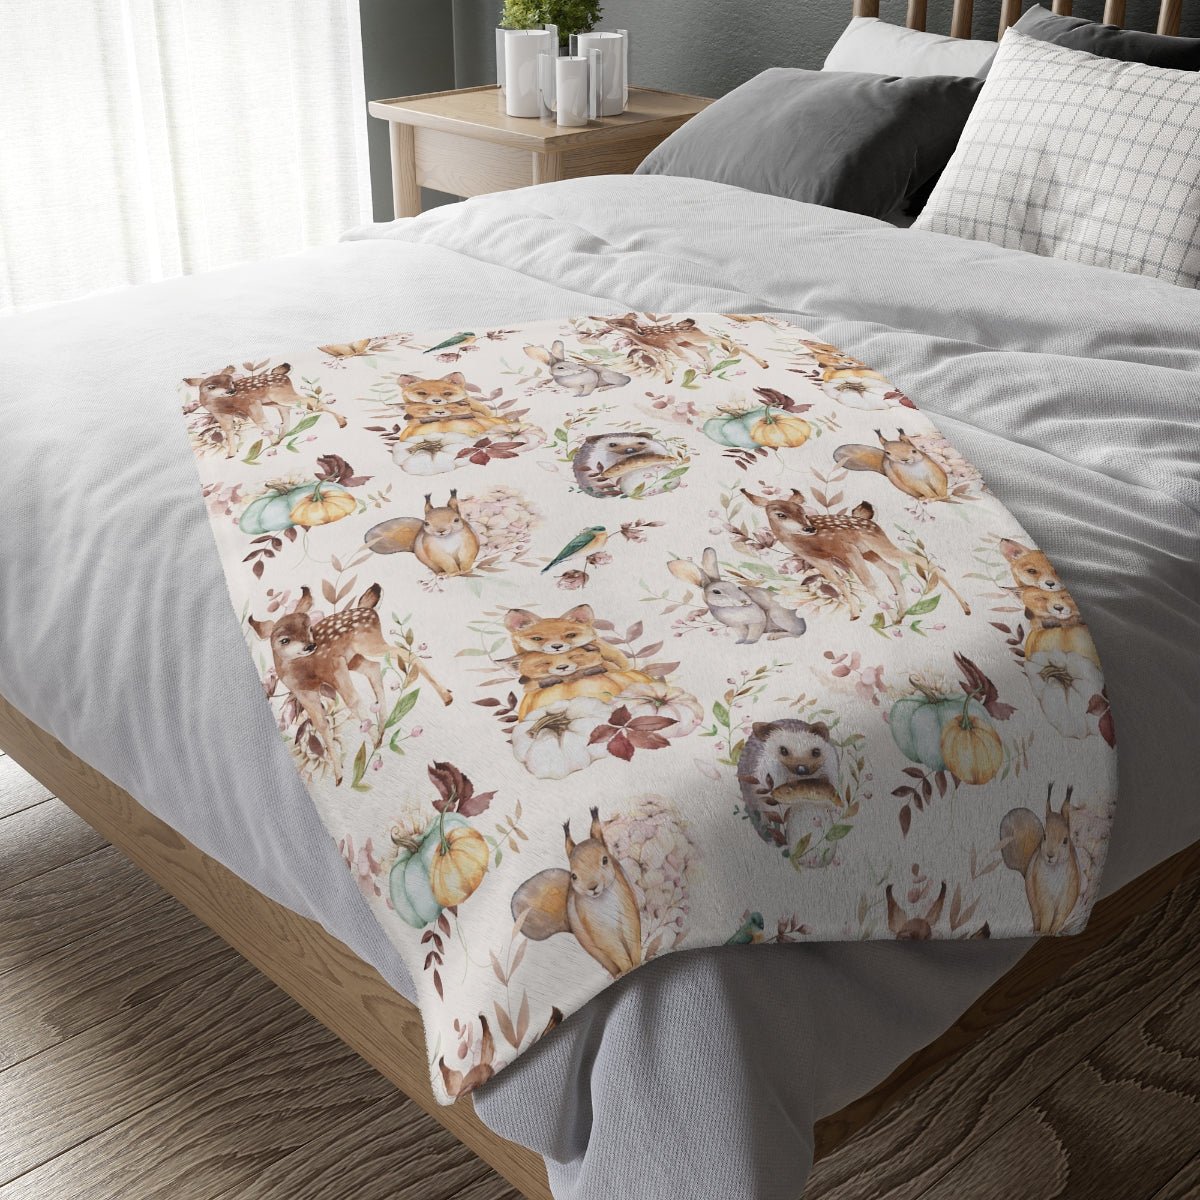 Woodland Animals Velveteen Minky Blanket (Two-sided print) - Puffin Lime